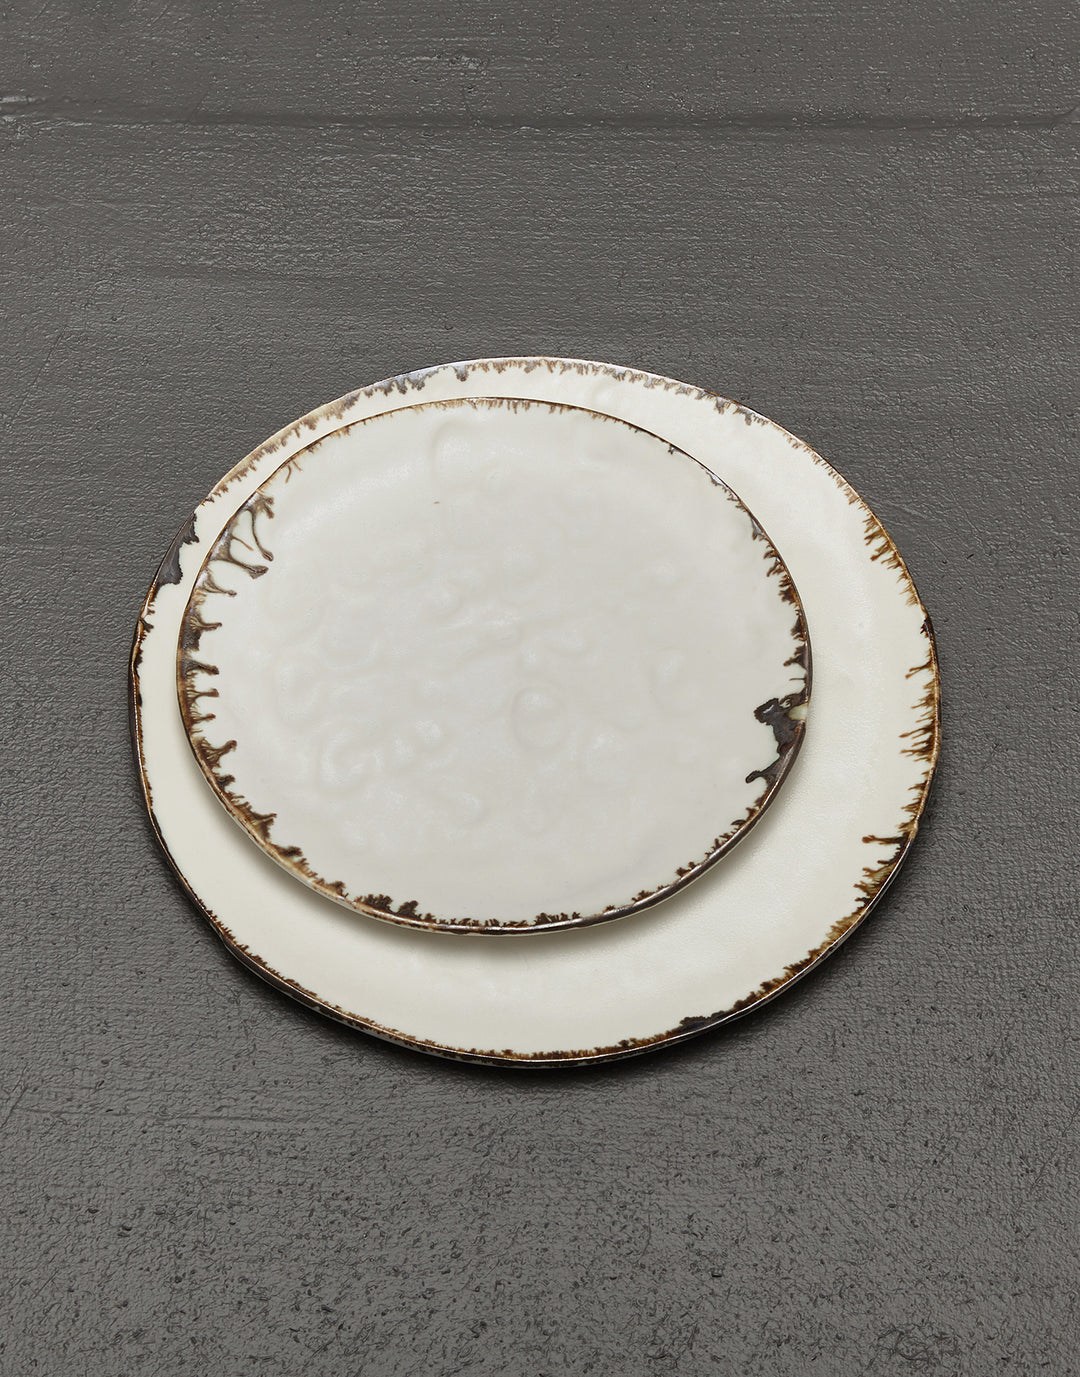 artisan ceramic luxury dinner plate and salad plate, textured white porcelain with decorative bronze drip edges